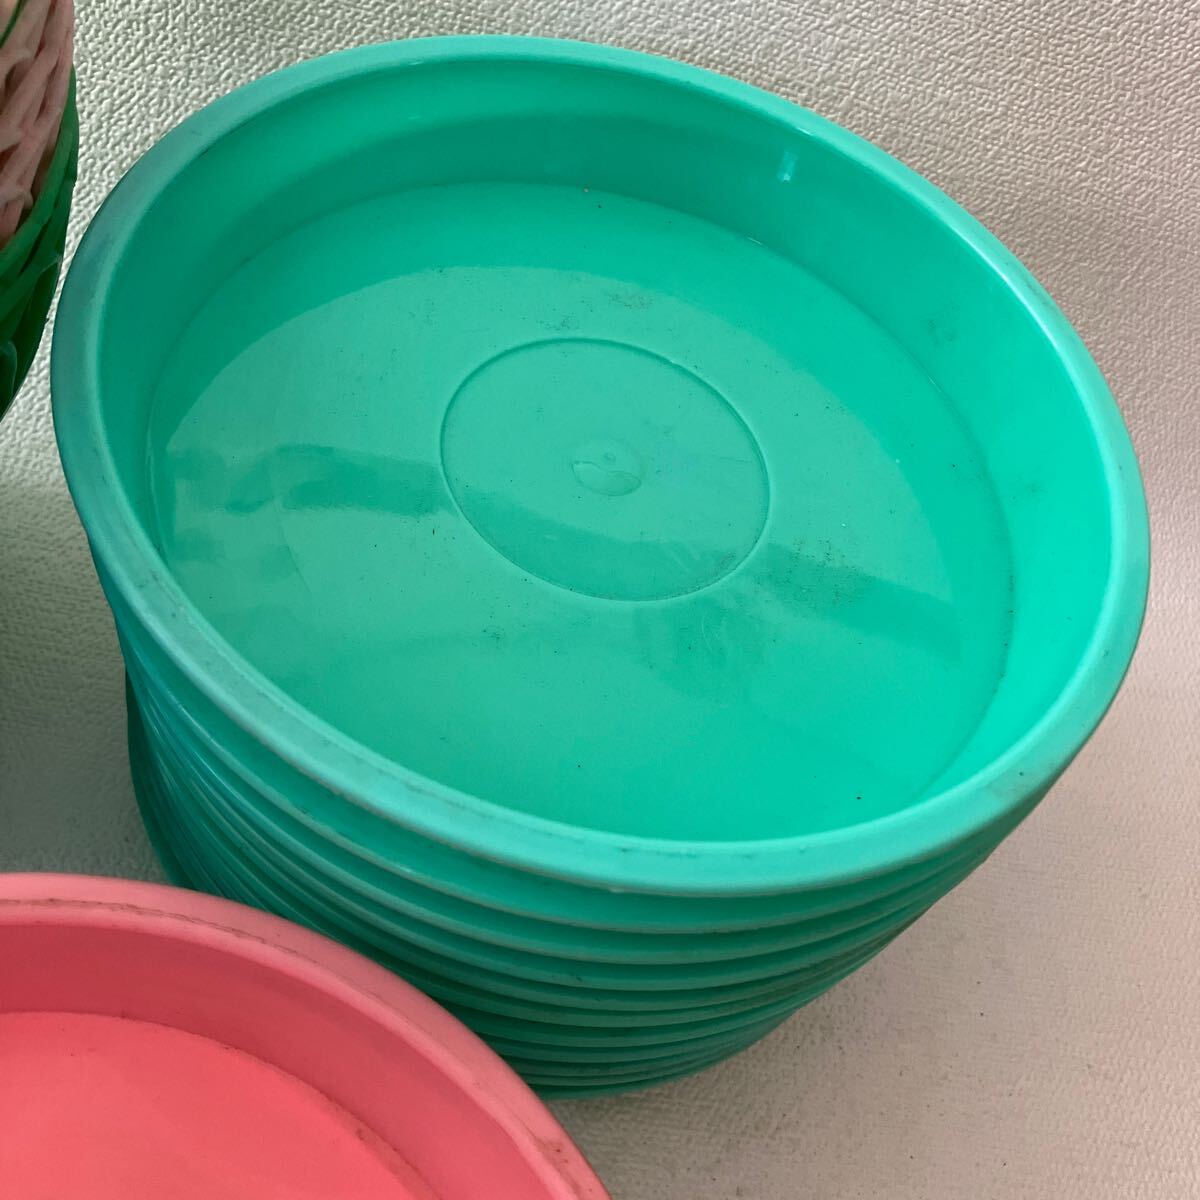 c322 100 pot saucer large amount set 6 number color various pot decoration together gardening gardening supplies garden plastic colorful white dirt equipped price . equipped 